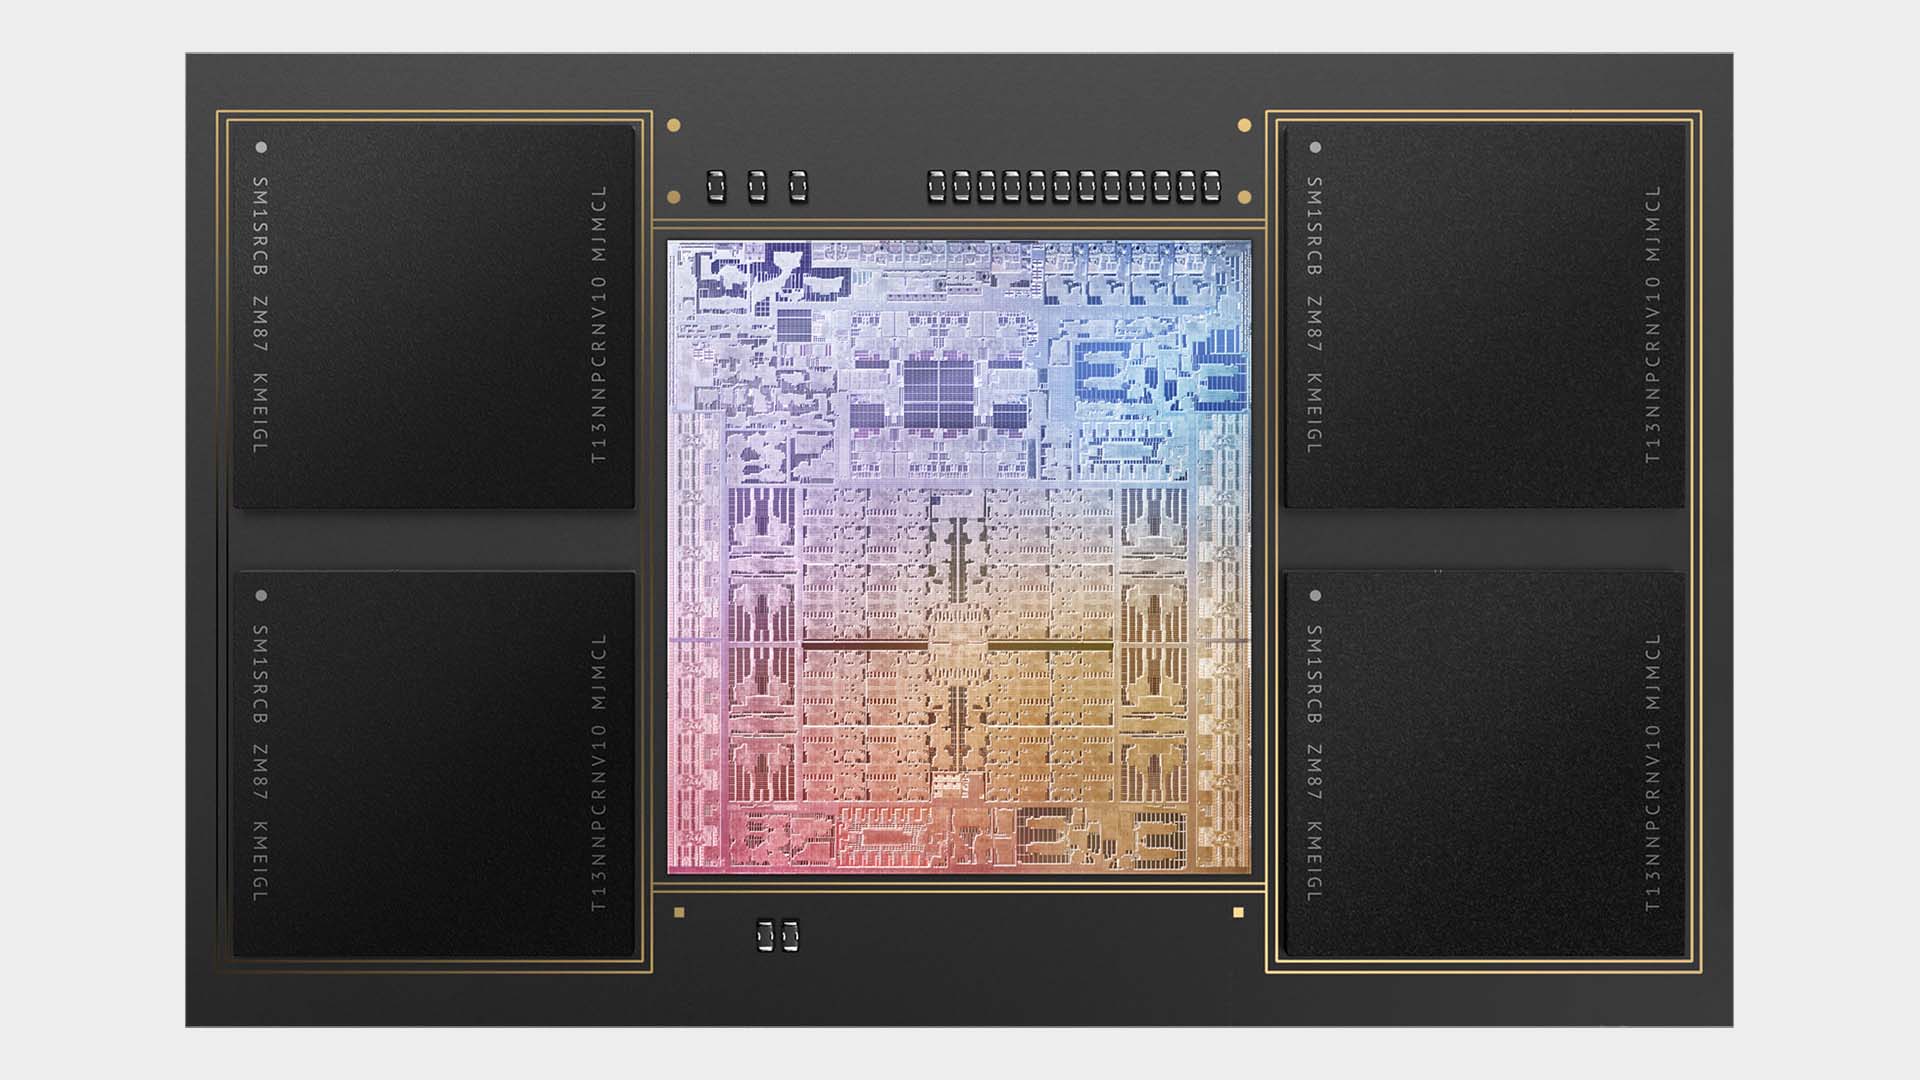  Apple claims its new M1 Max chip is a match for Nvidia's RTX 3080, but should we believe it? 